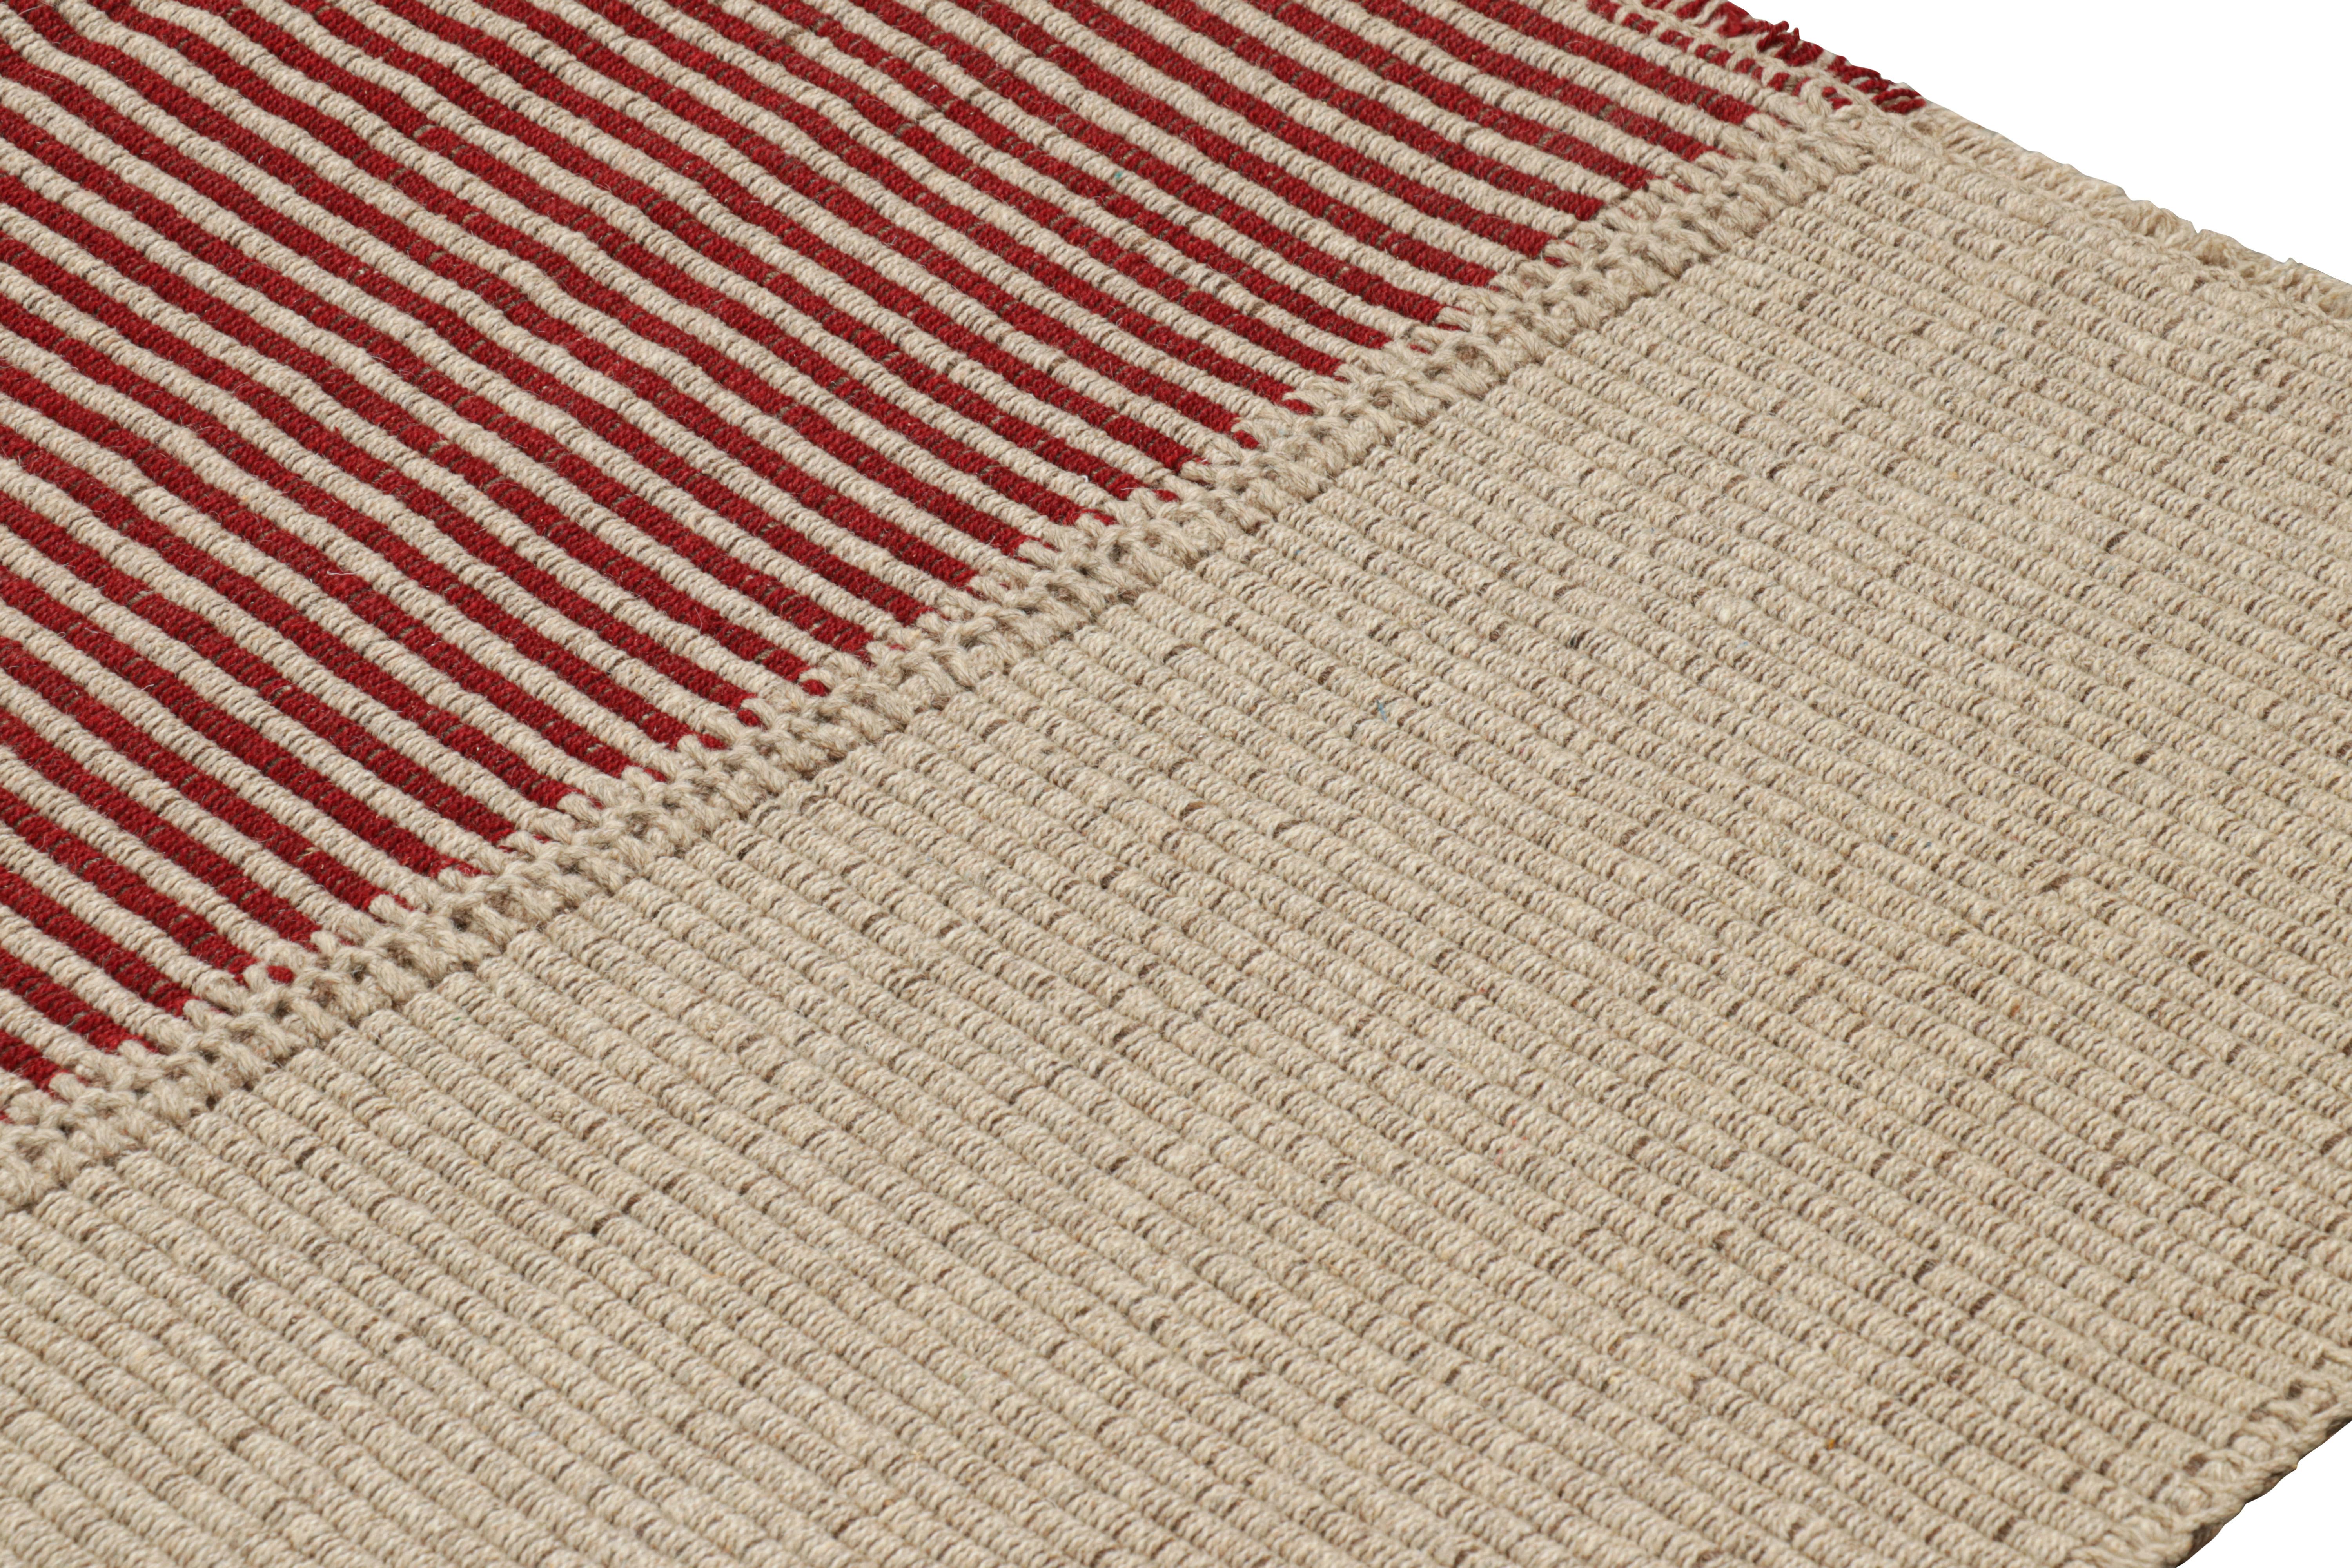 Rug & Kilim’s Contemporary Kilim in Red and Beige Textural Stripes  In New Condition For Sale In Long Island City, NY